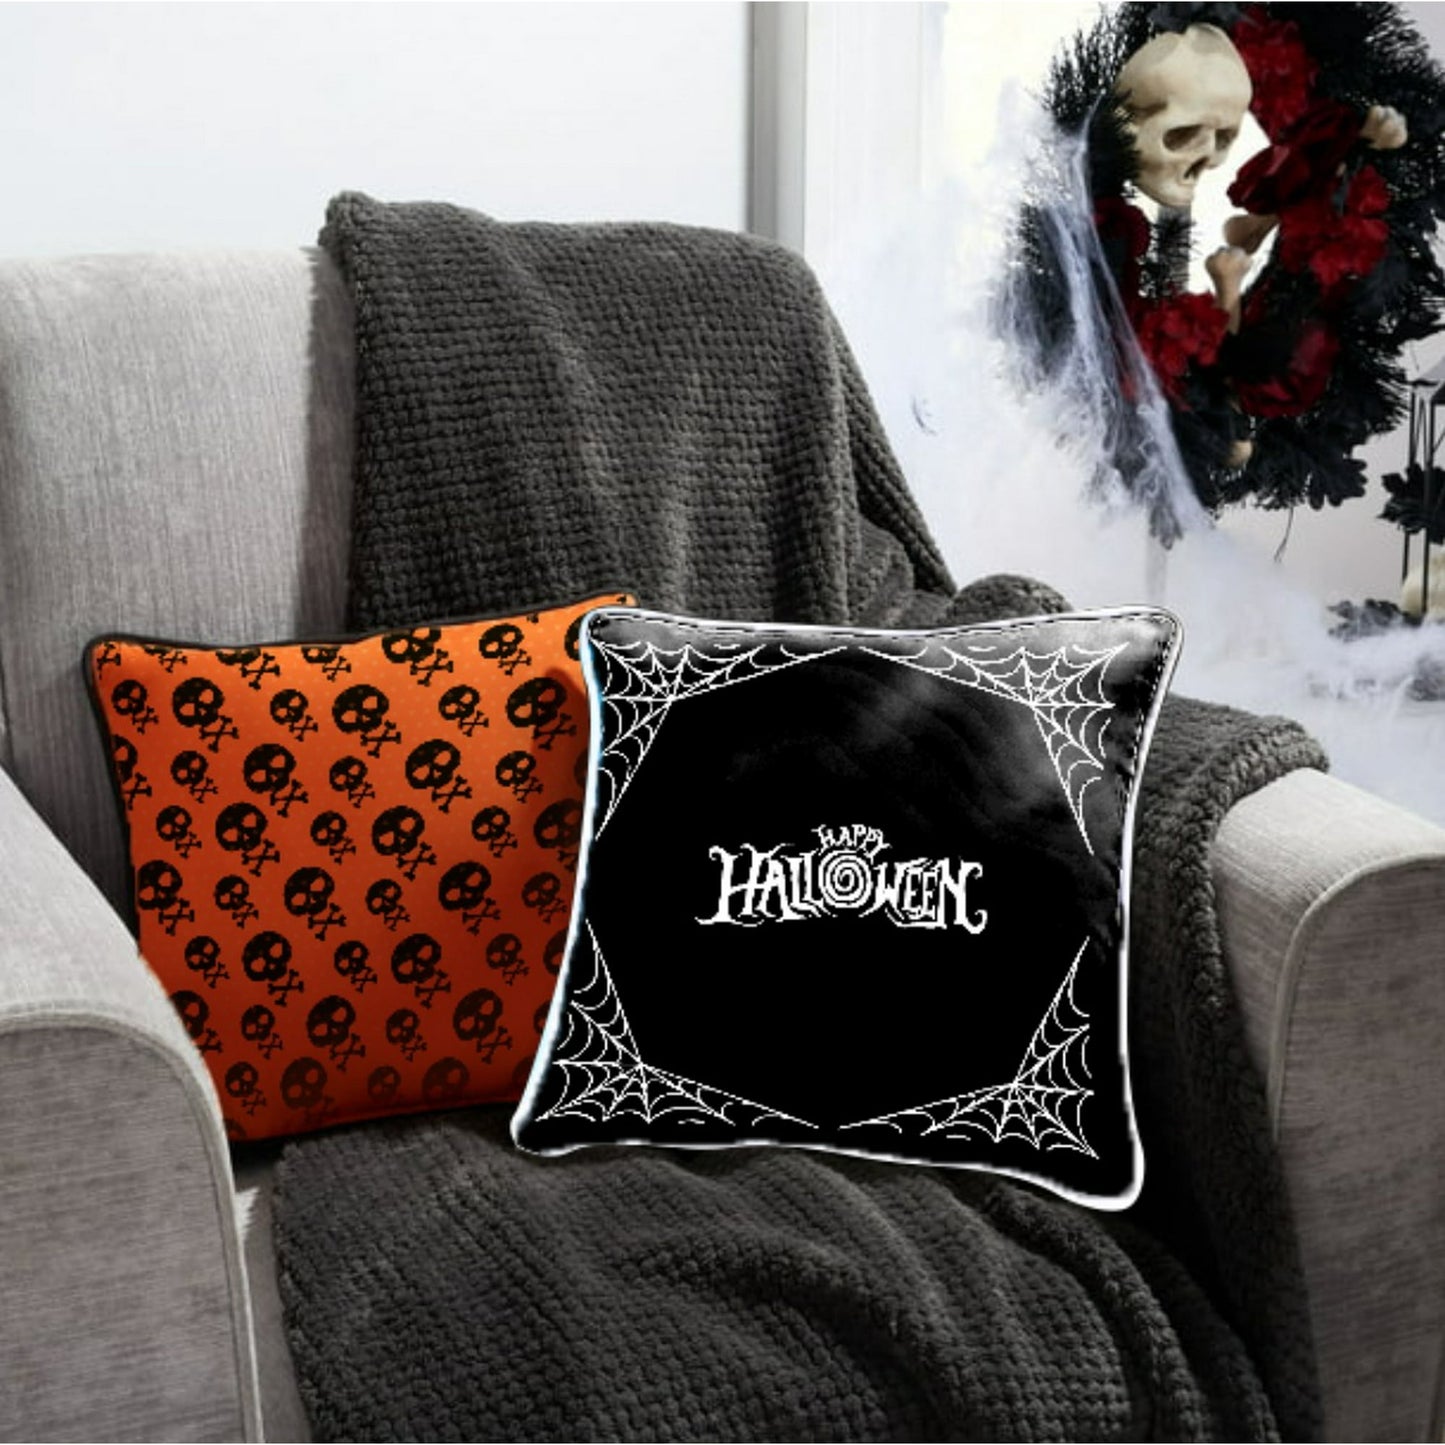 Black and white spider web Halloween pillow